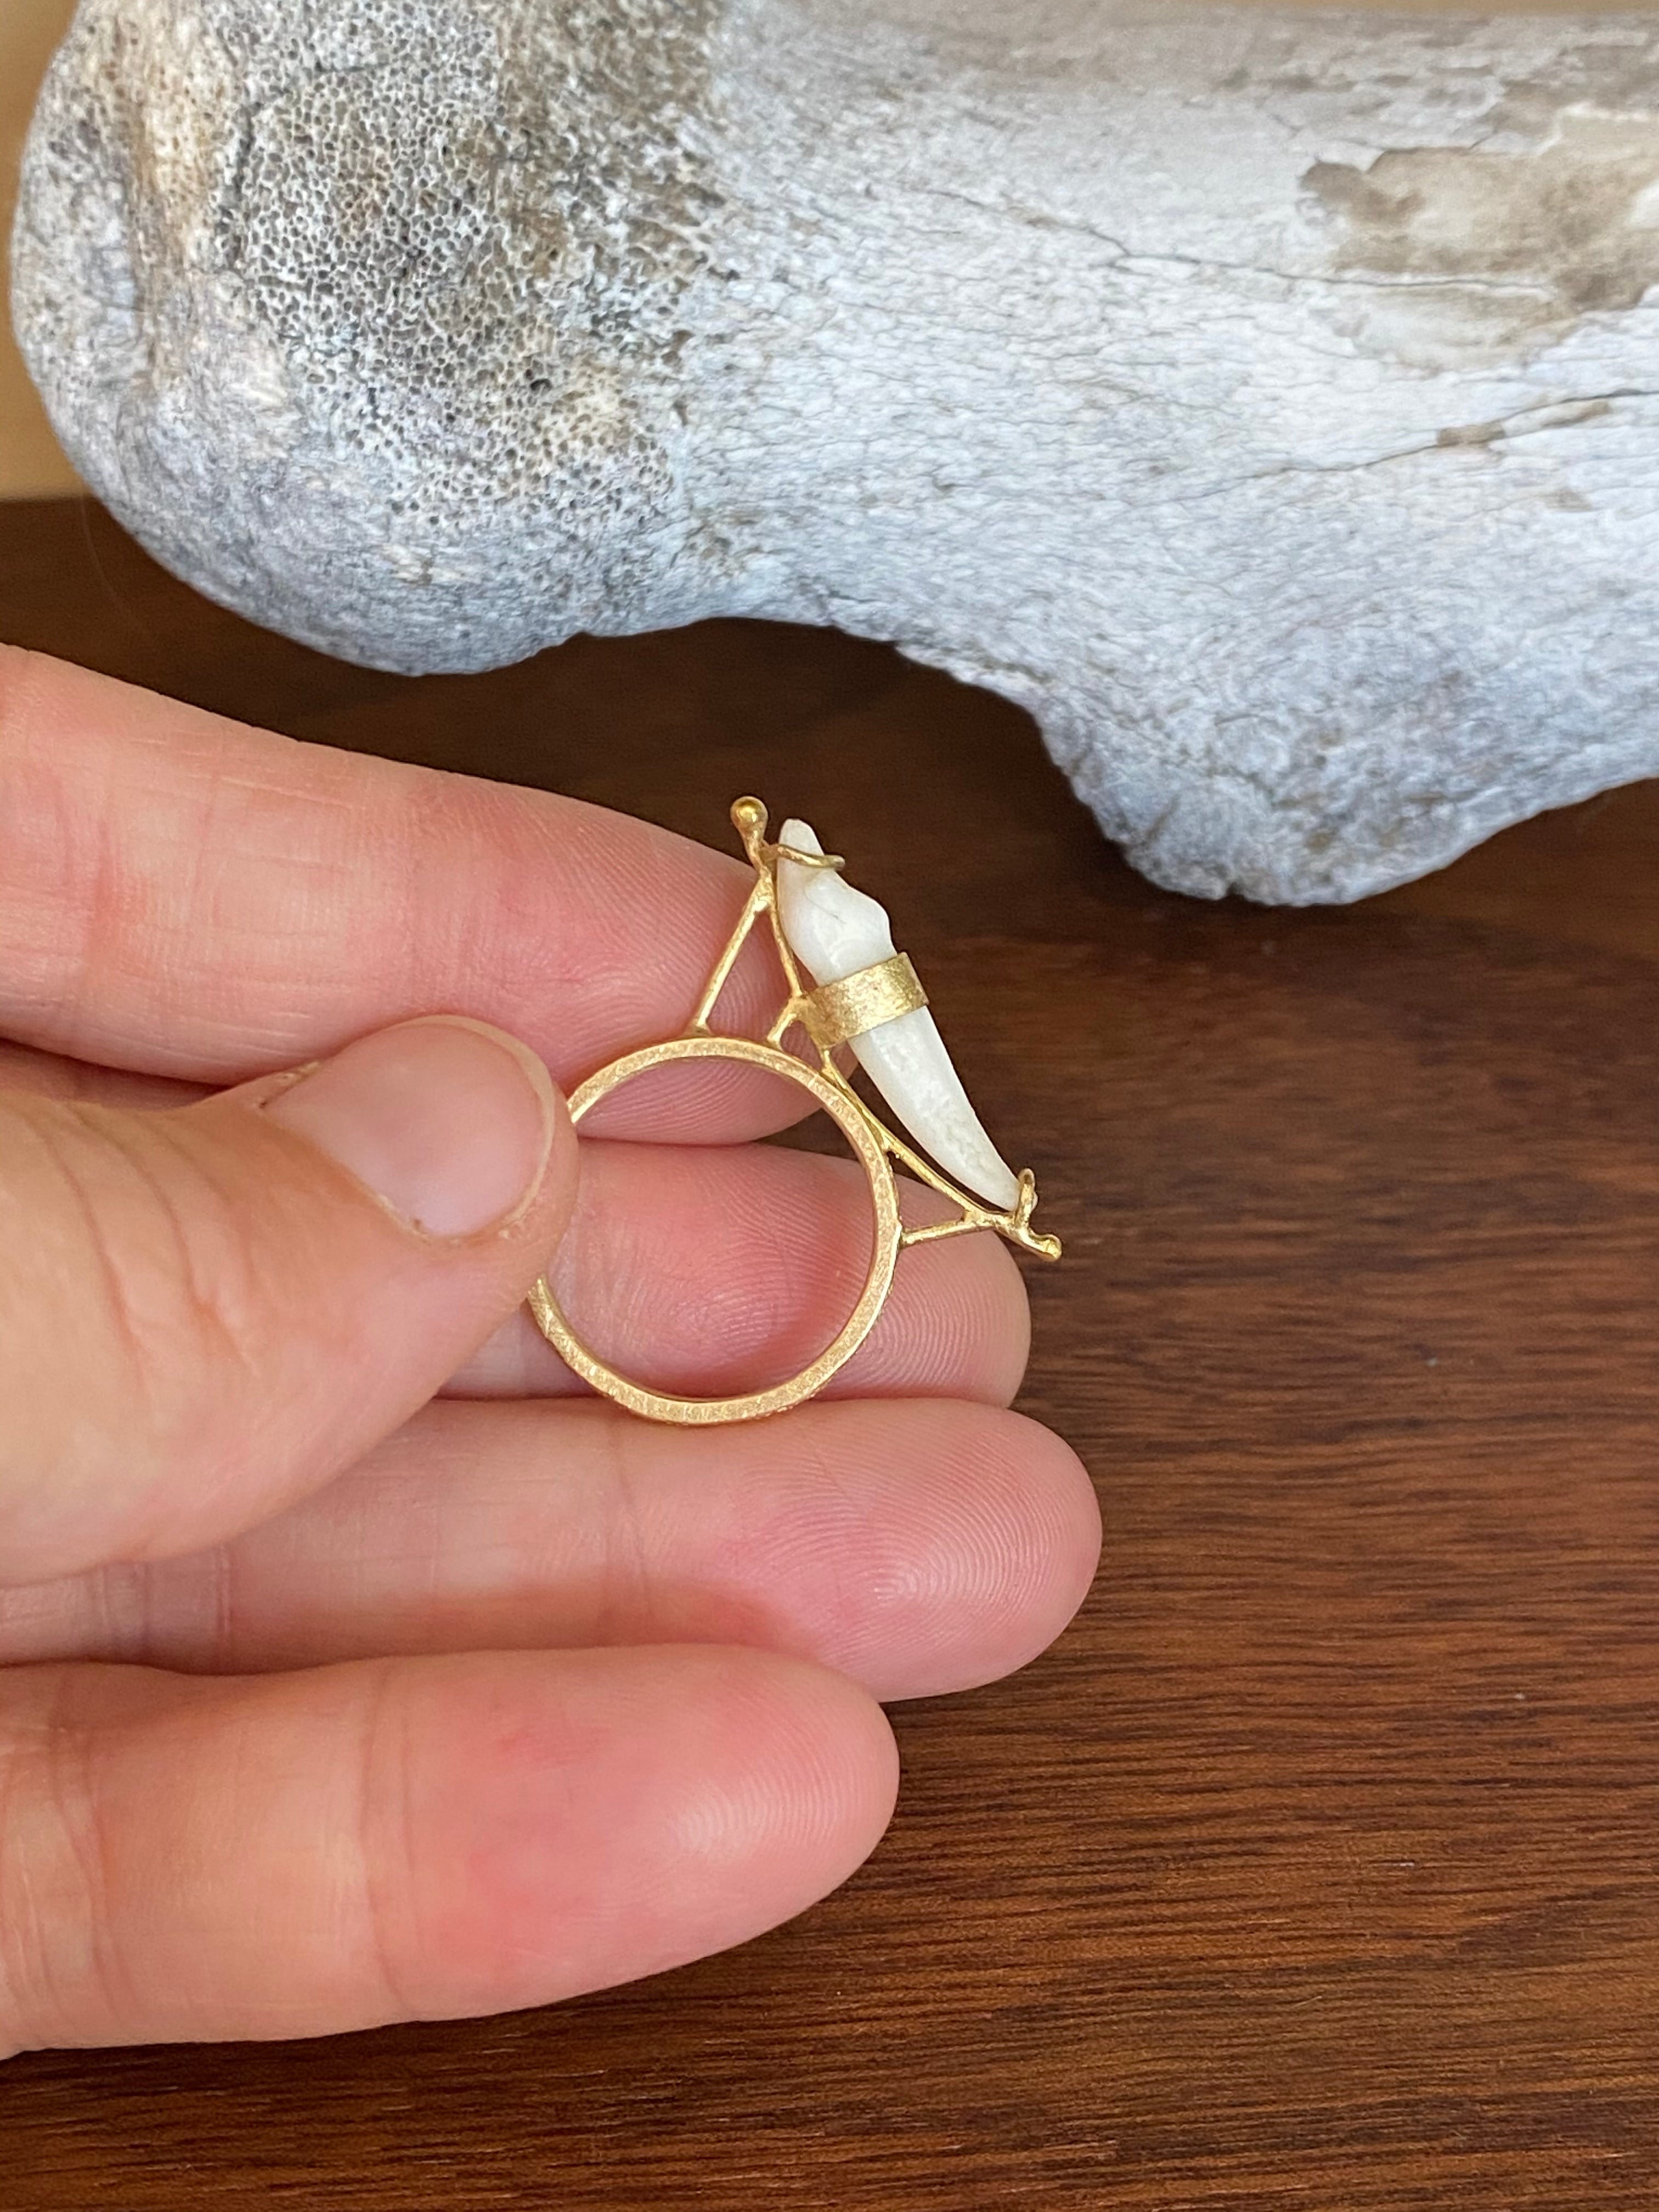 M. Rose Studio- Reclined Carnivore Tooth Ring